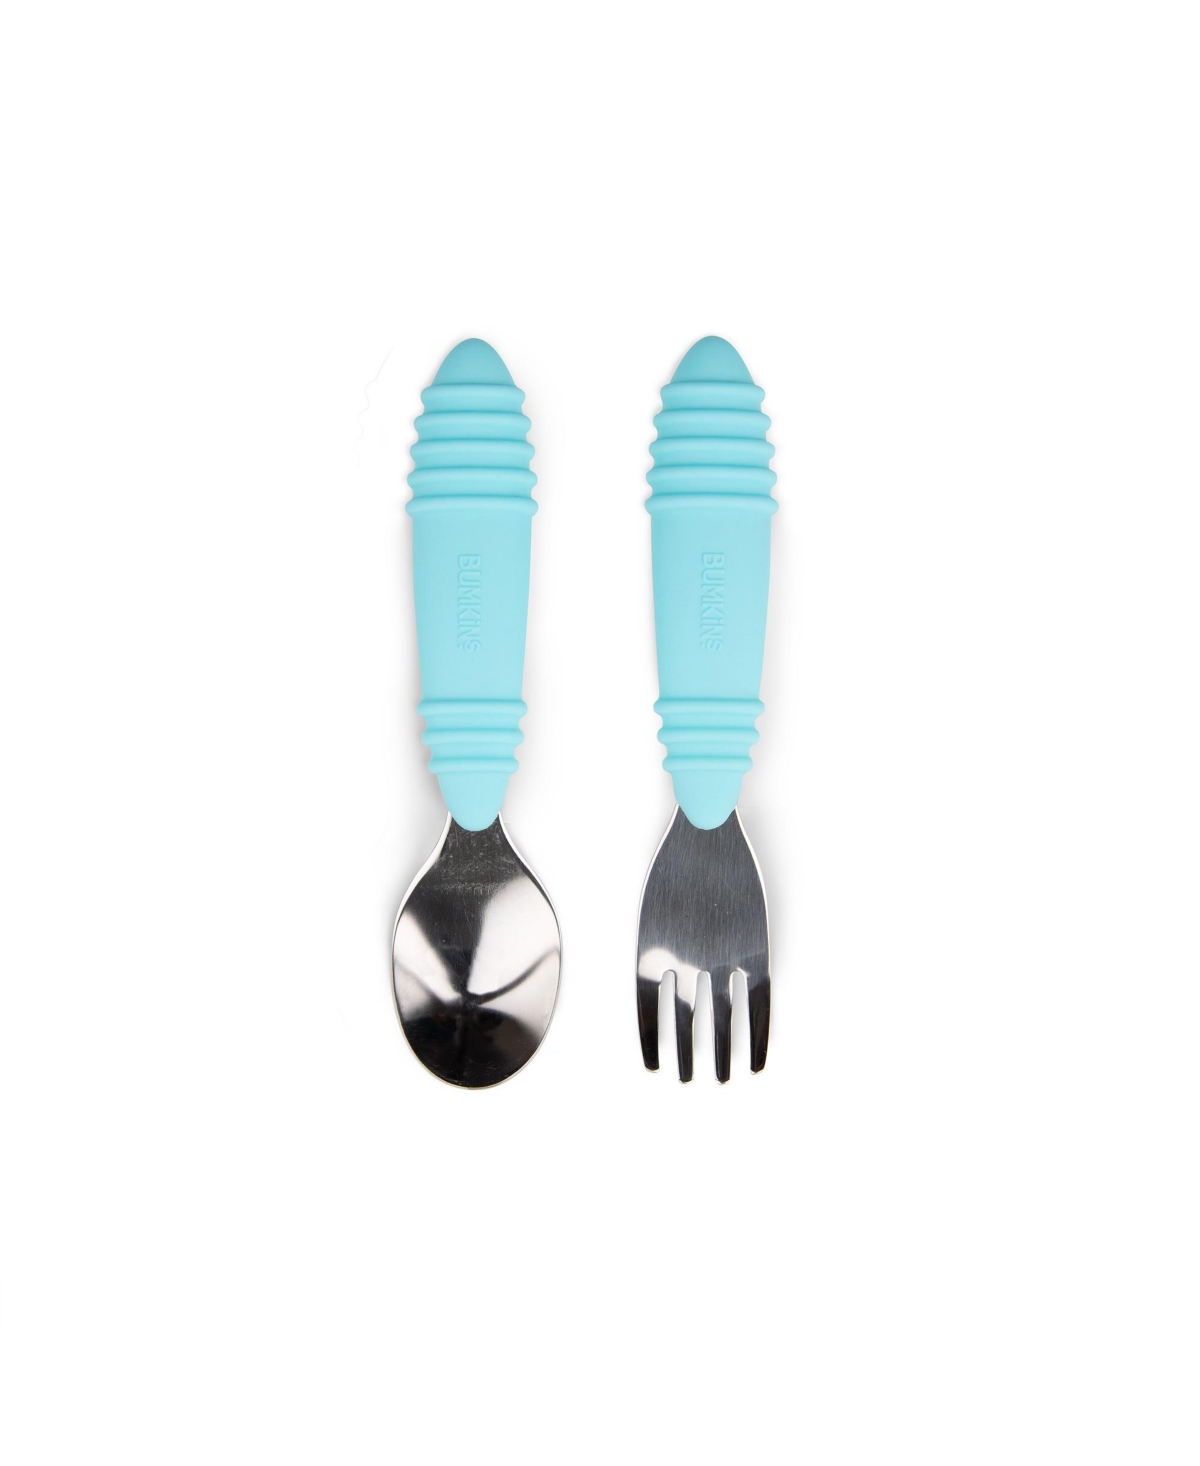 Bumkins Toddler Spoon and Fork